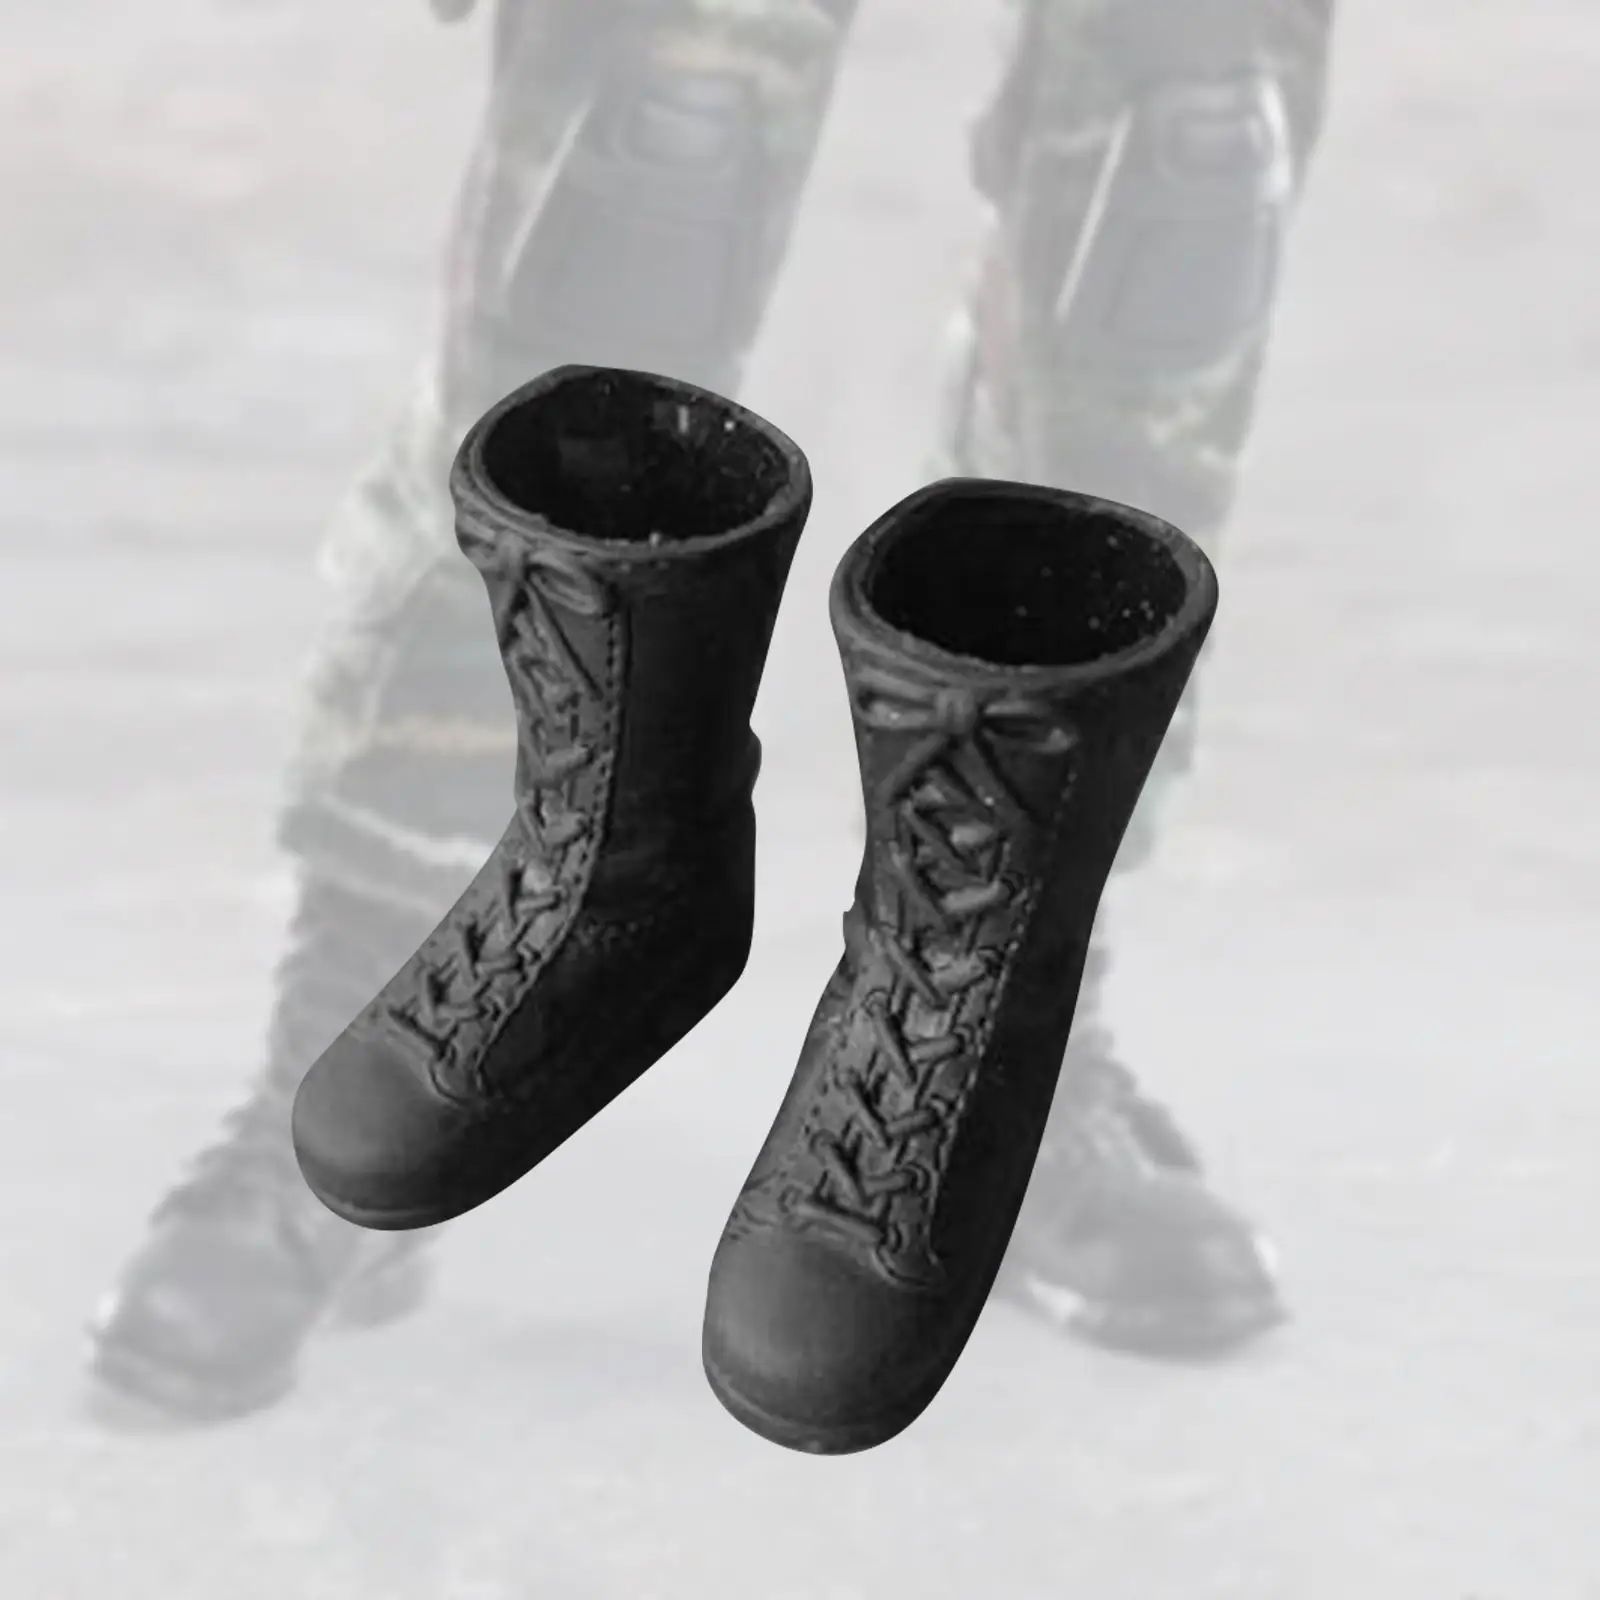 1/6 Scale Ankle Bootie Miniature Soldier Costume, Mid Calf boots Outfit Fashion for 12`` inch Soldier Figures Accessory